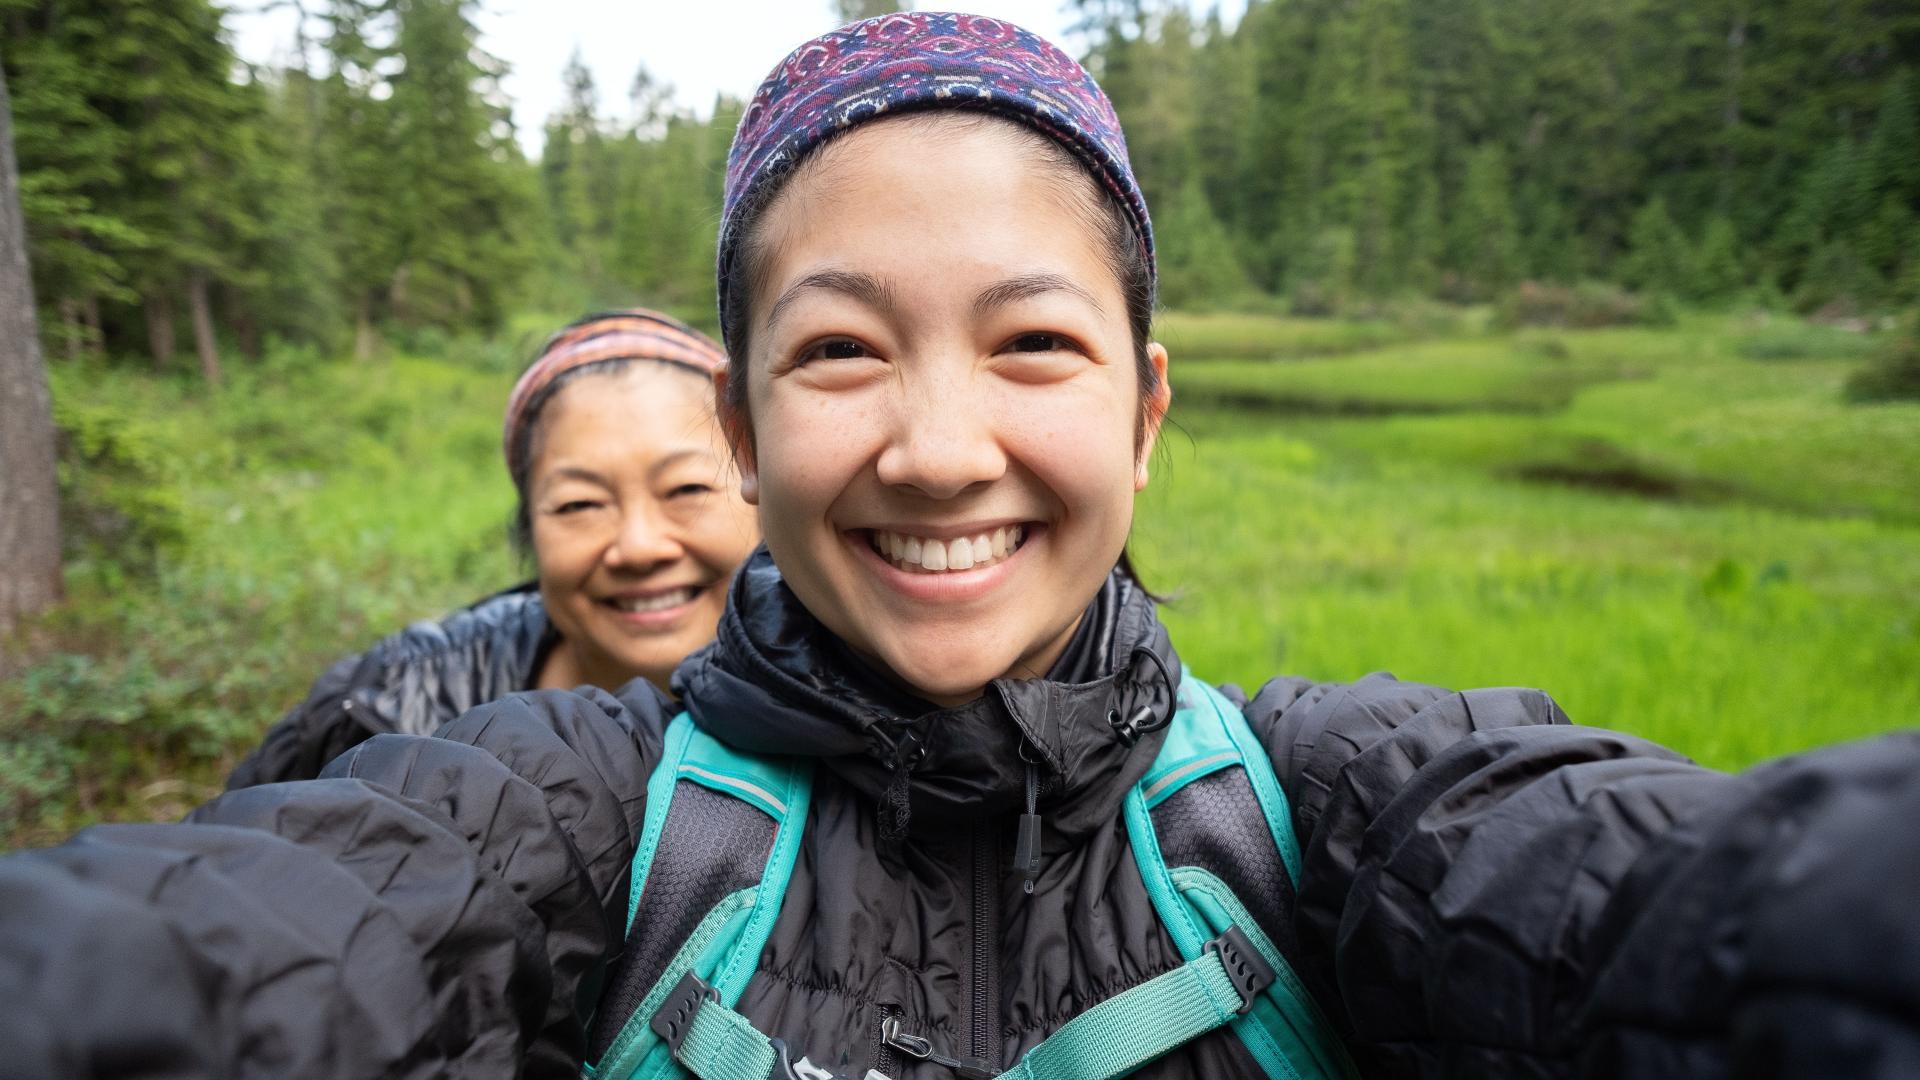 Two people standing in a forested area with smiling faces.